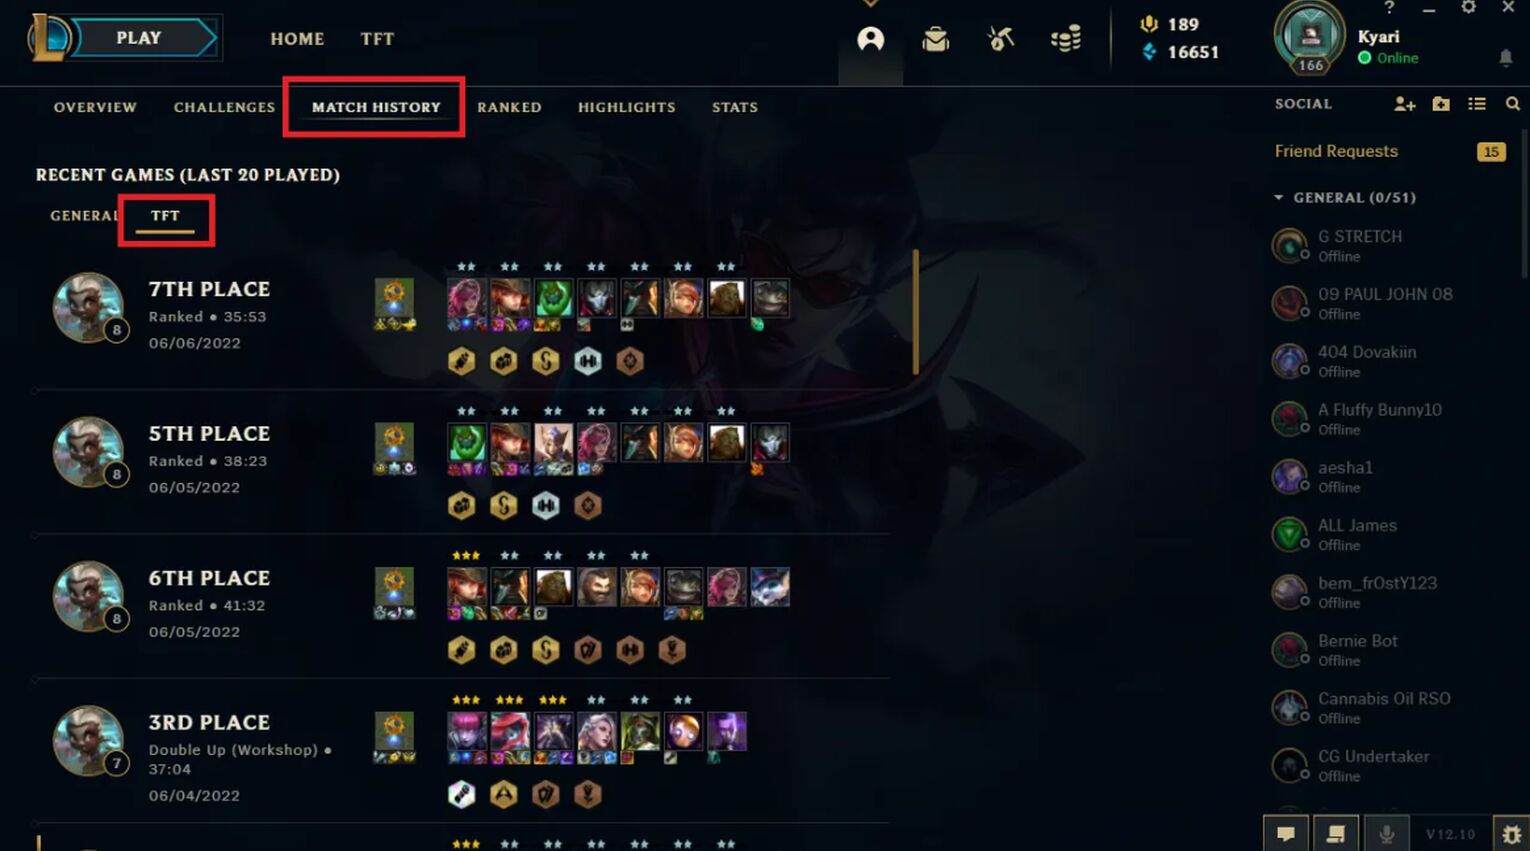 How To View Your TFT Match History